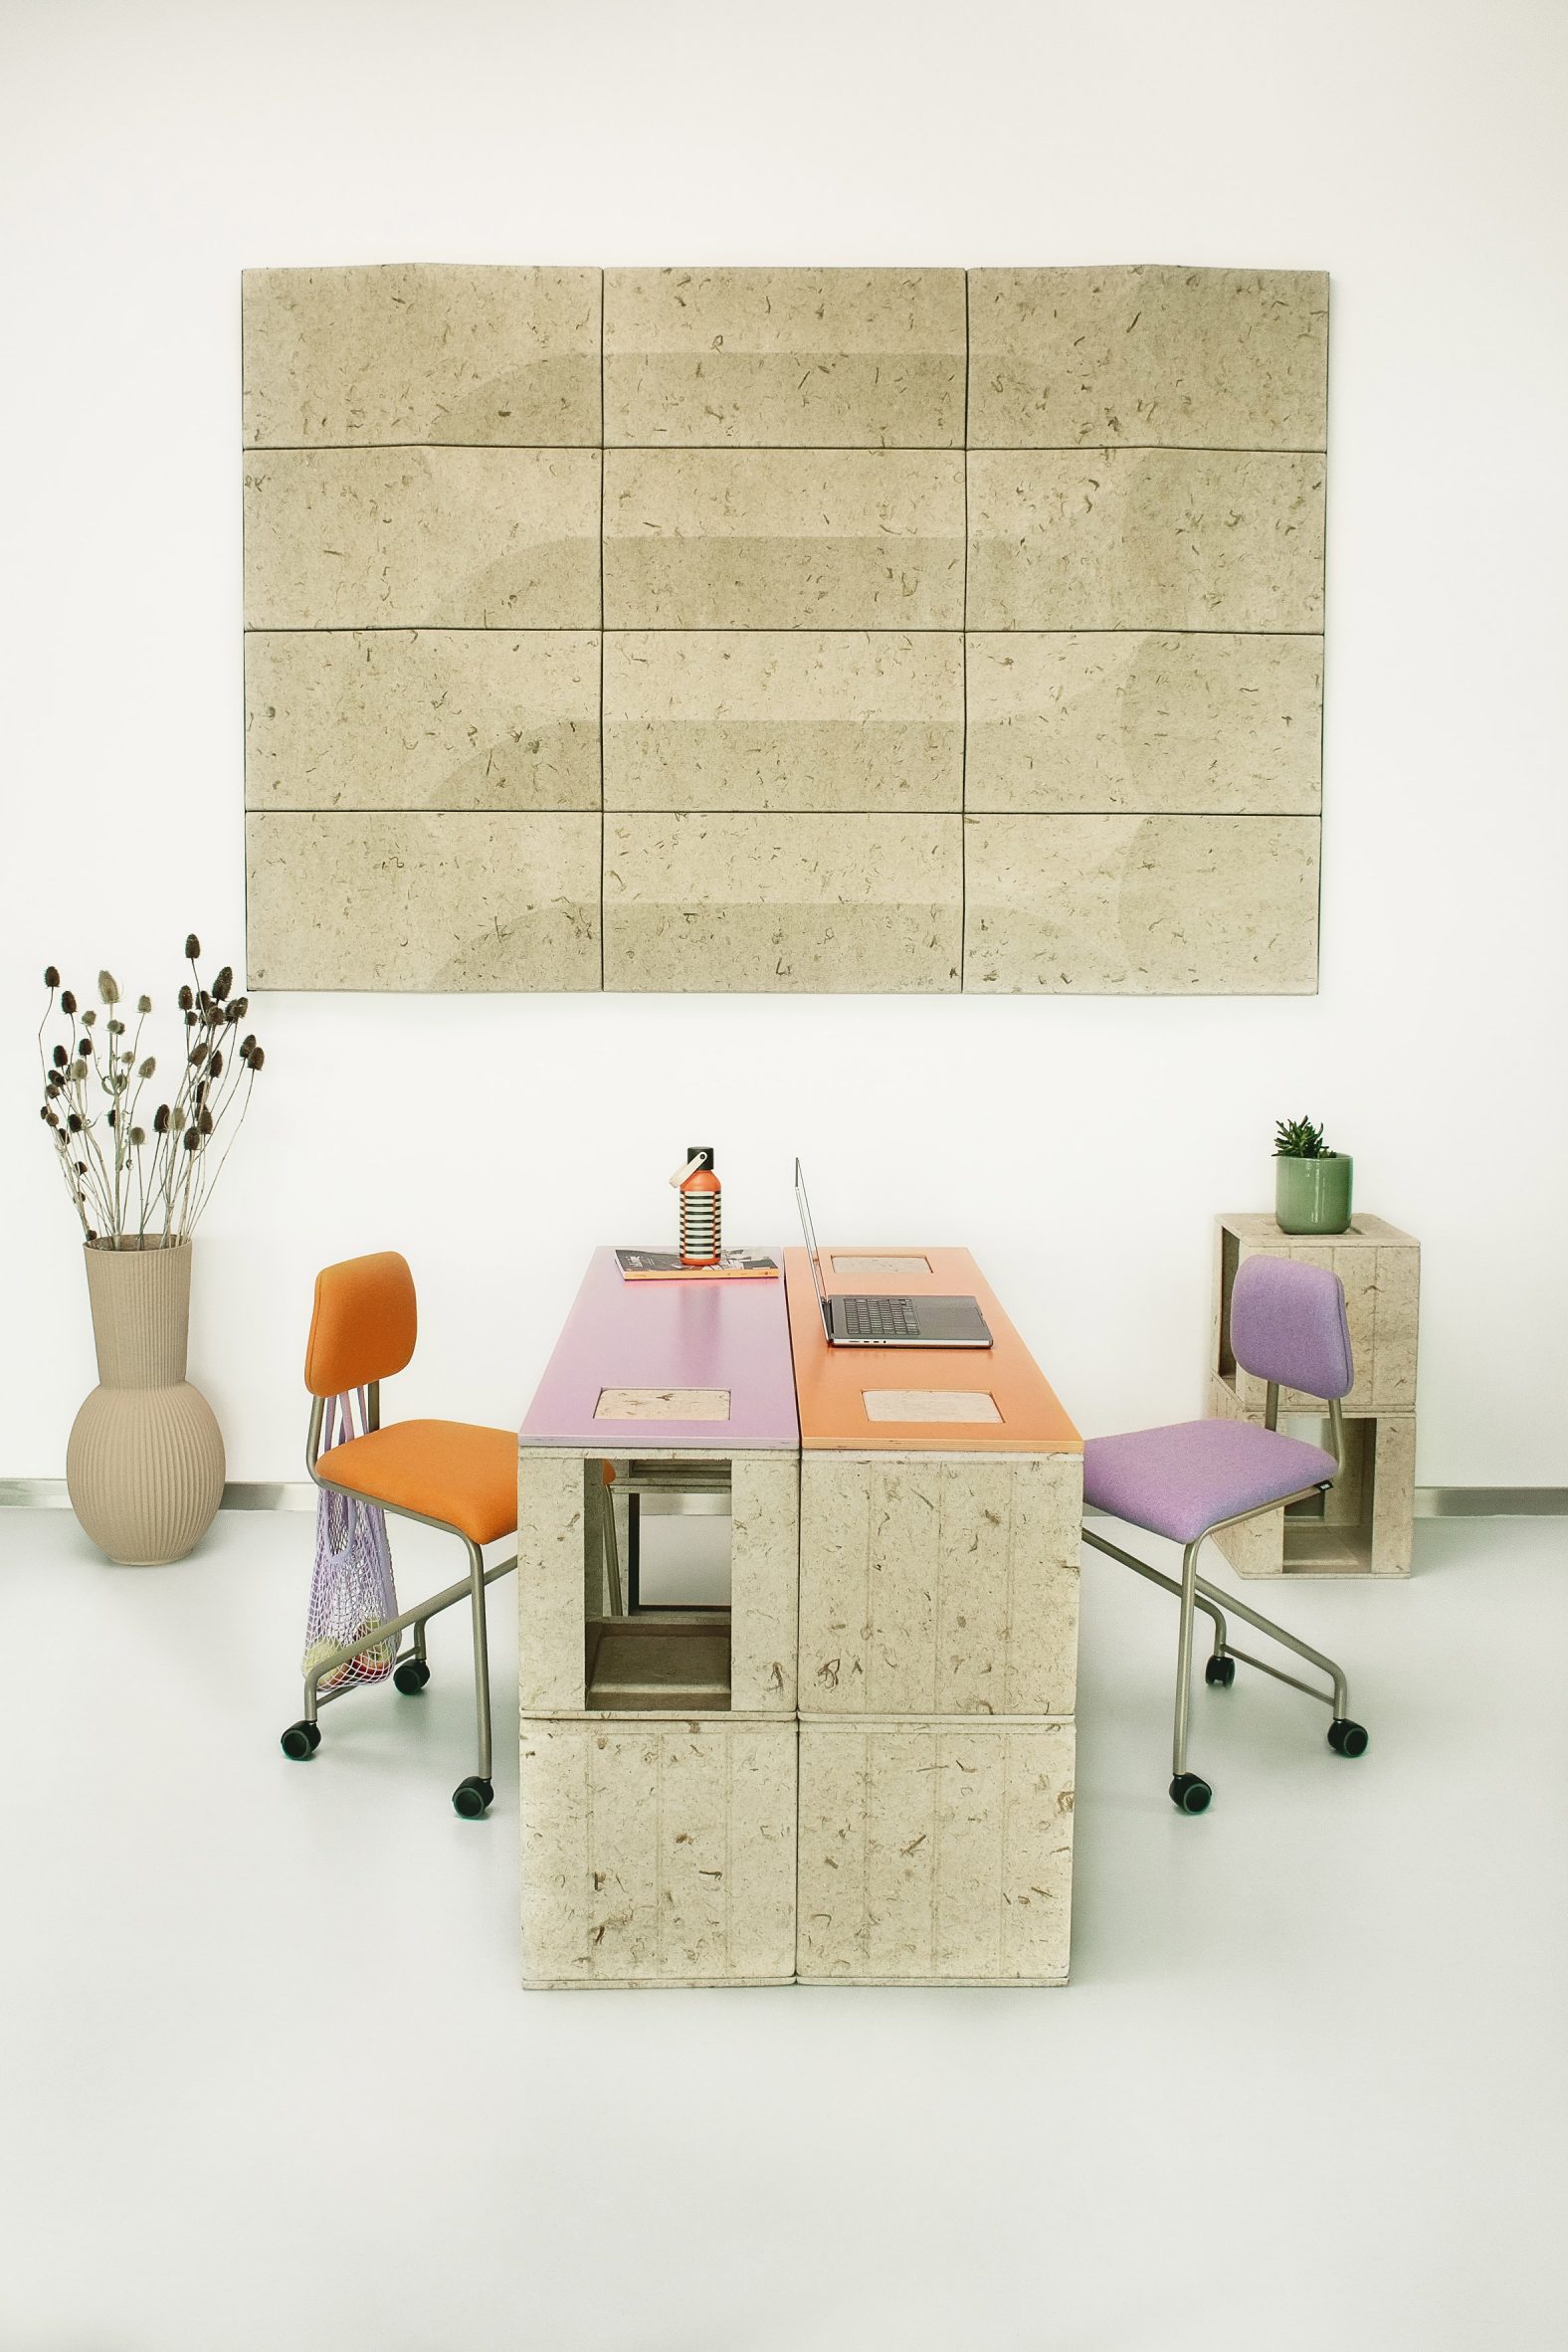 Desk made from Vank Cube modular system by Vank